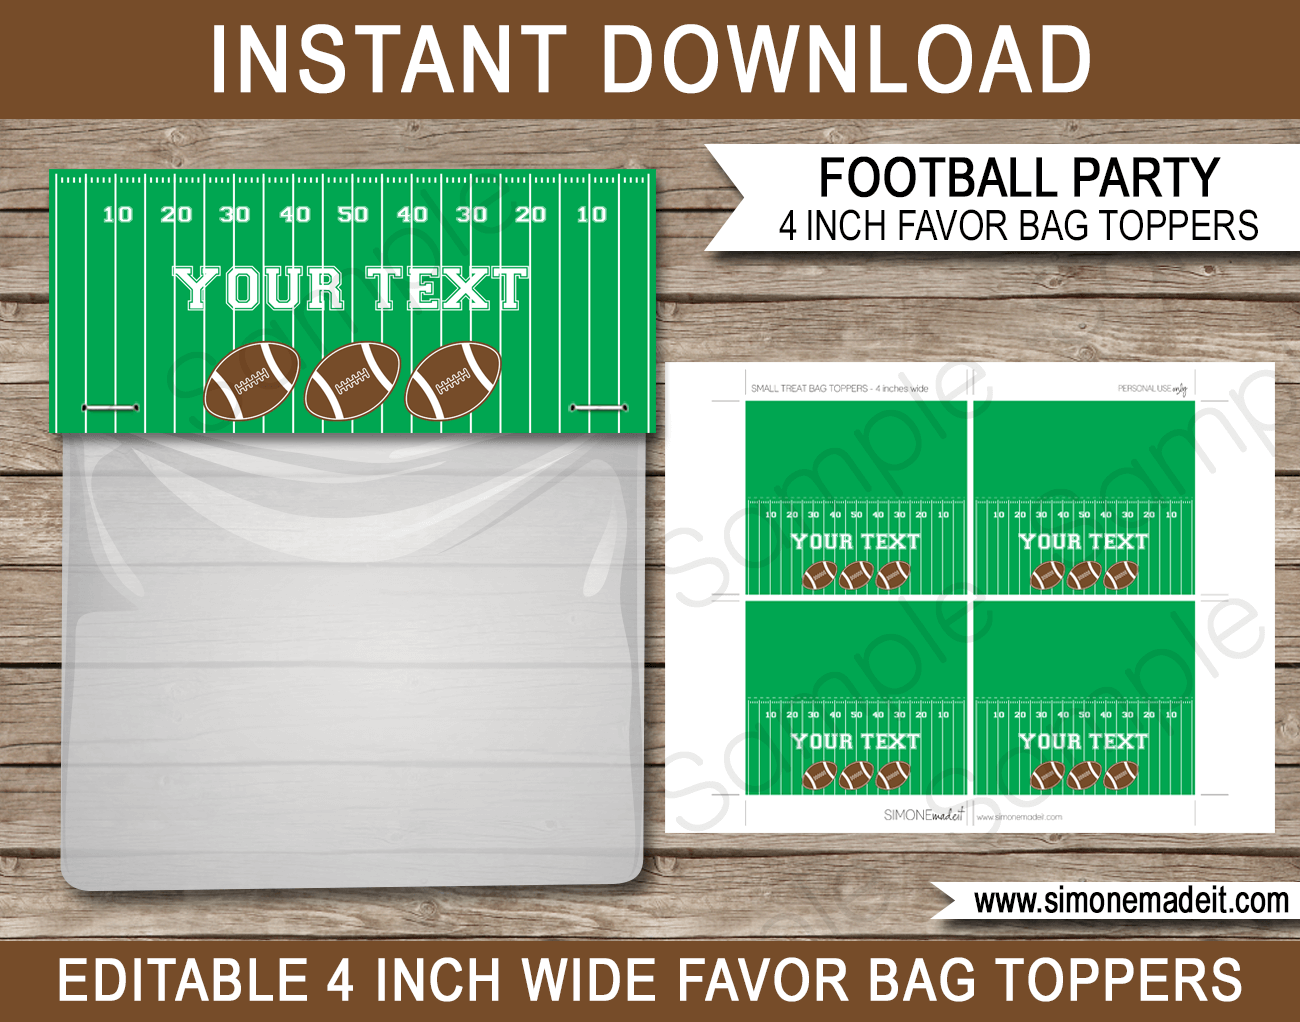 Printable Football Party Favor Bag Toppers Template | Birthday Party Favors | $3.00 INSTANT DOWNLOAD via SIMONEmadeit.com